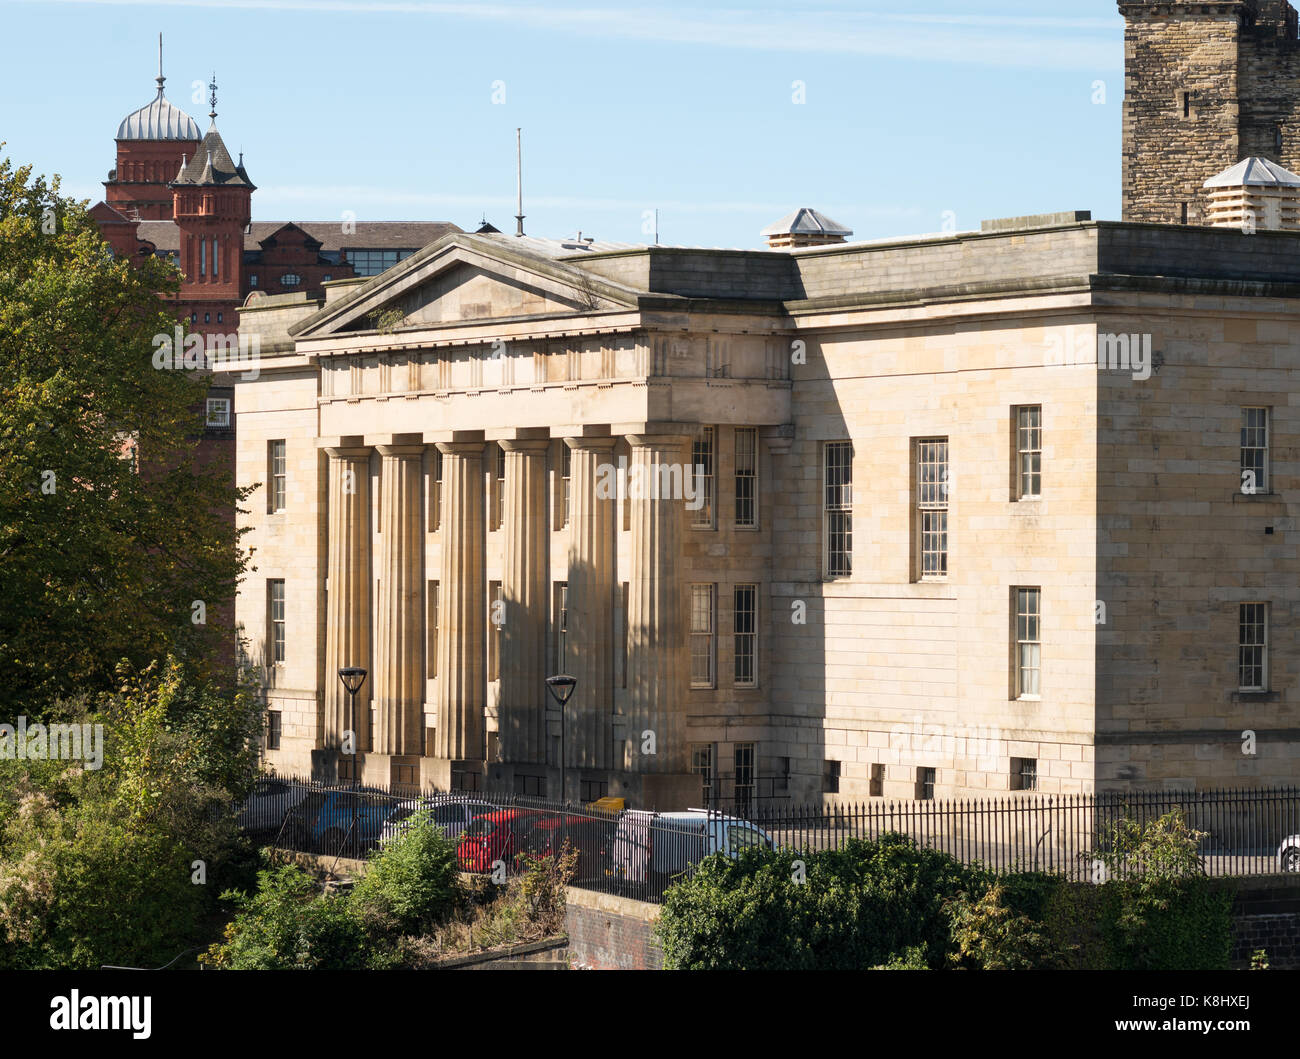 The Moot Hall, no longer the principal law court in Newcastle, but still in use for that function, north east England, UK Stock Photo